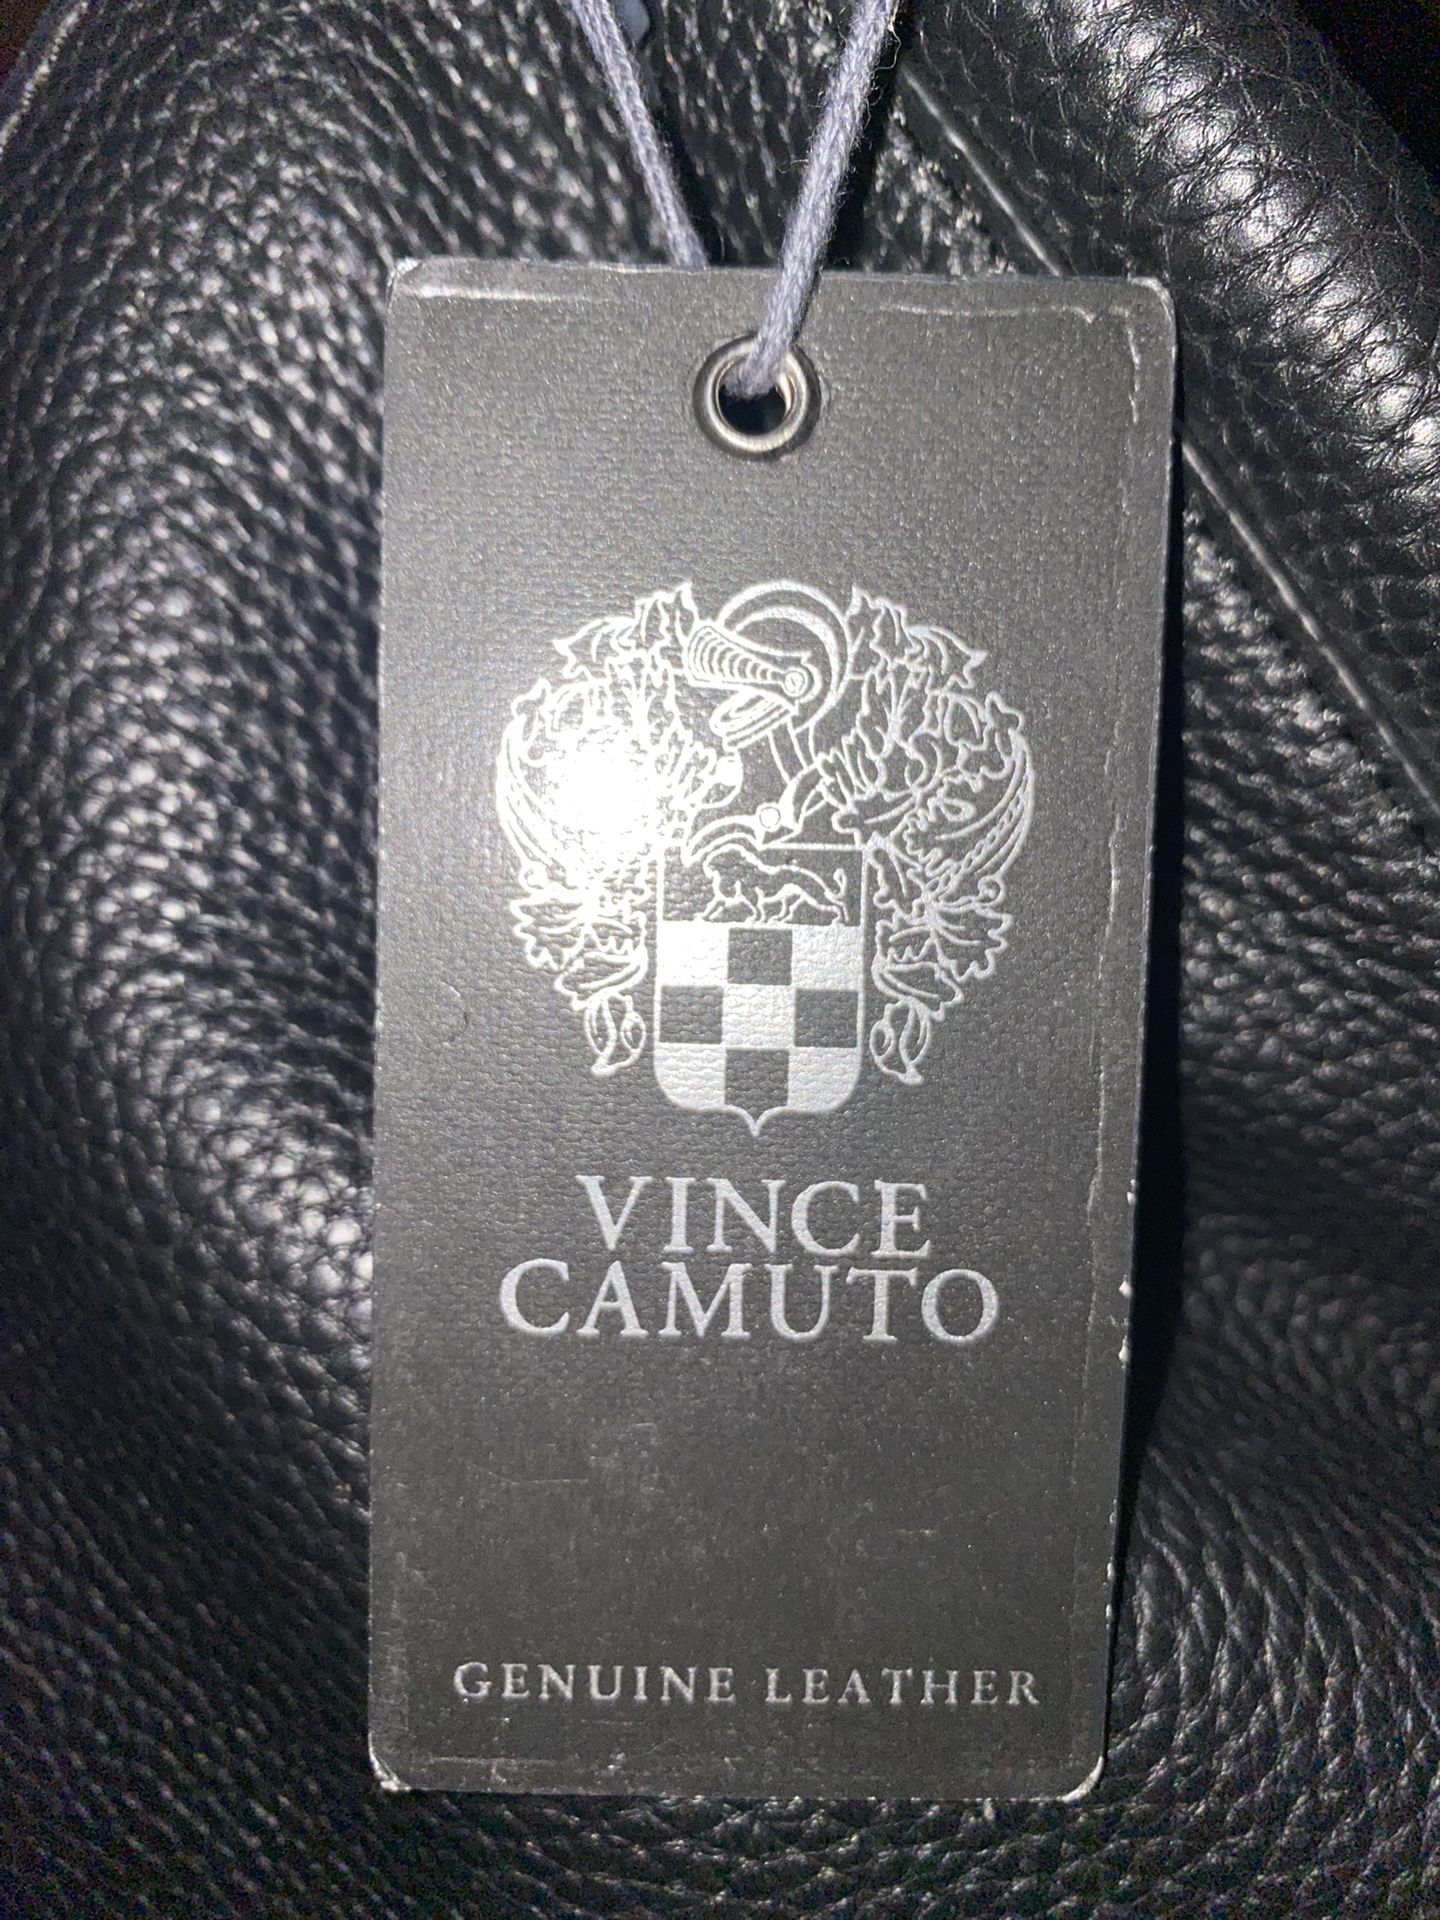 Vince Camuto Arjay Leather Tote